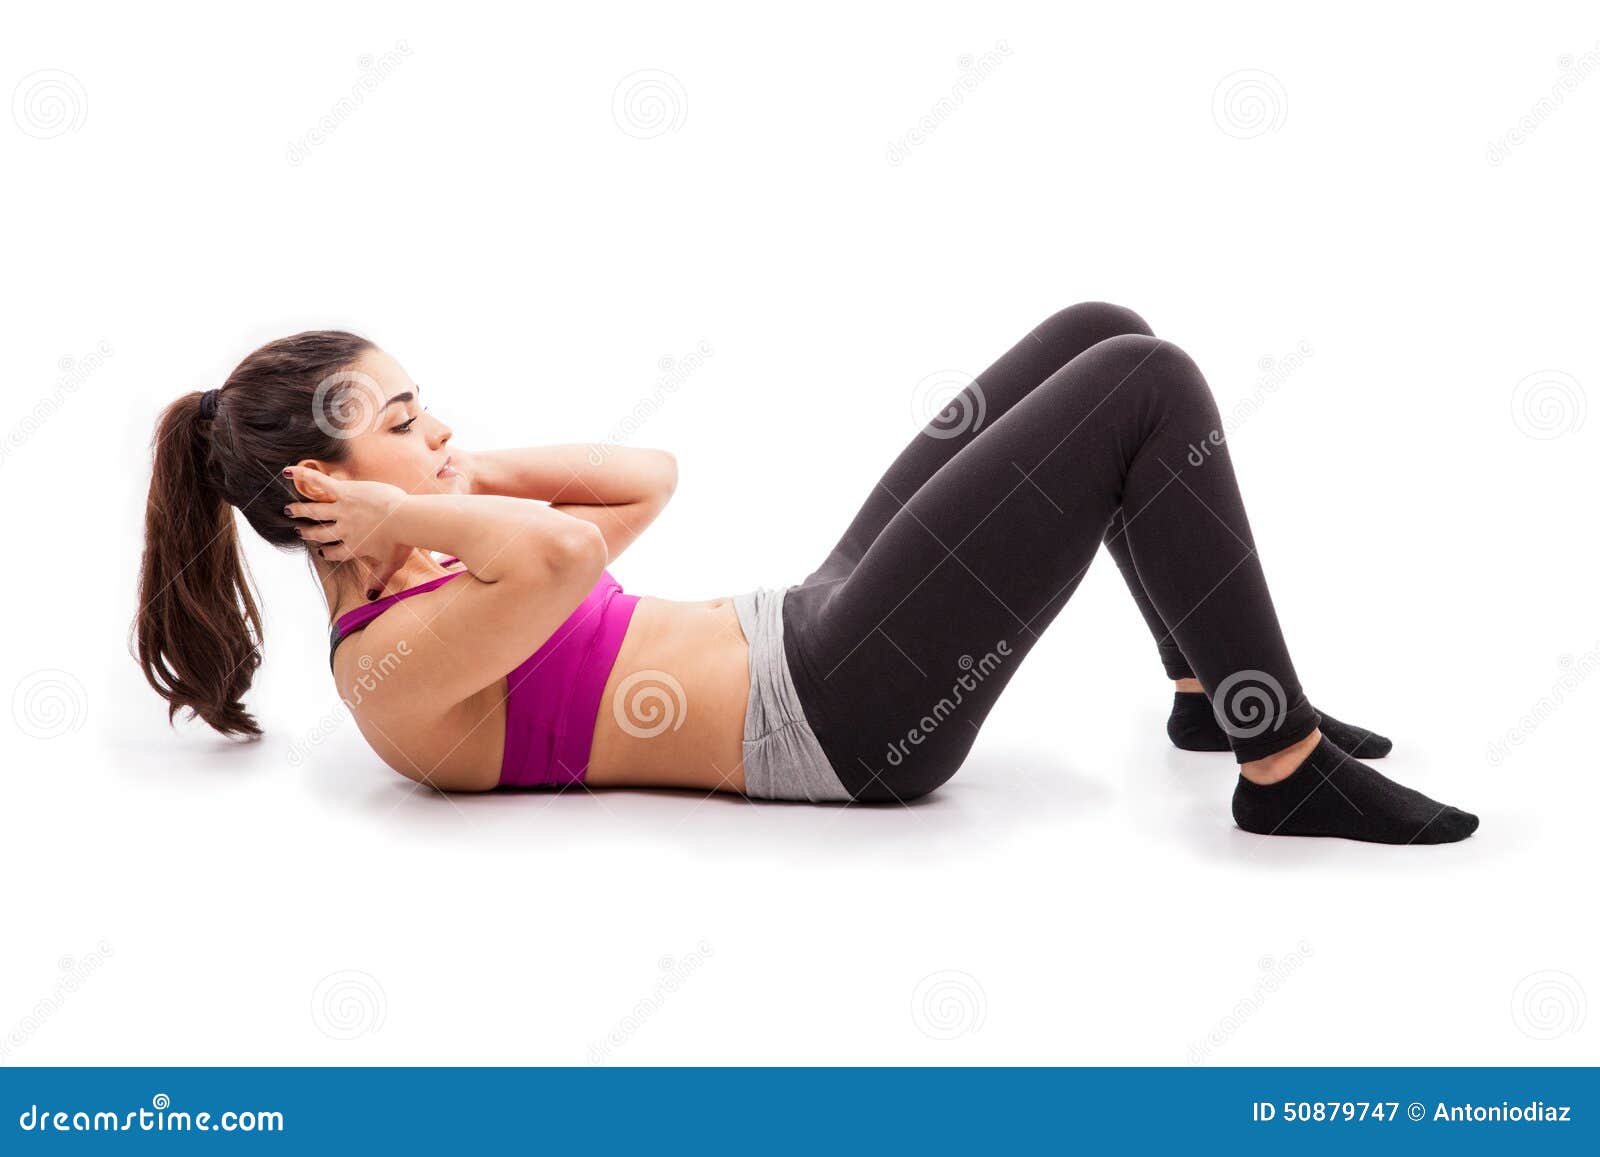 Doing Some Crunches On The Floor Stock Image Image Of White